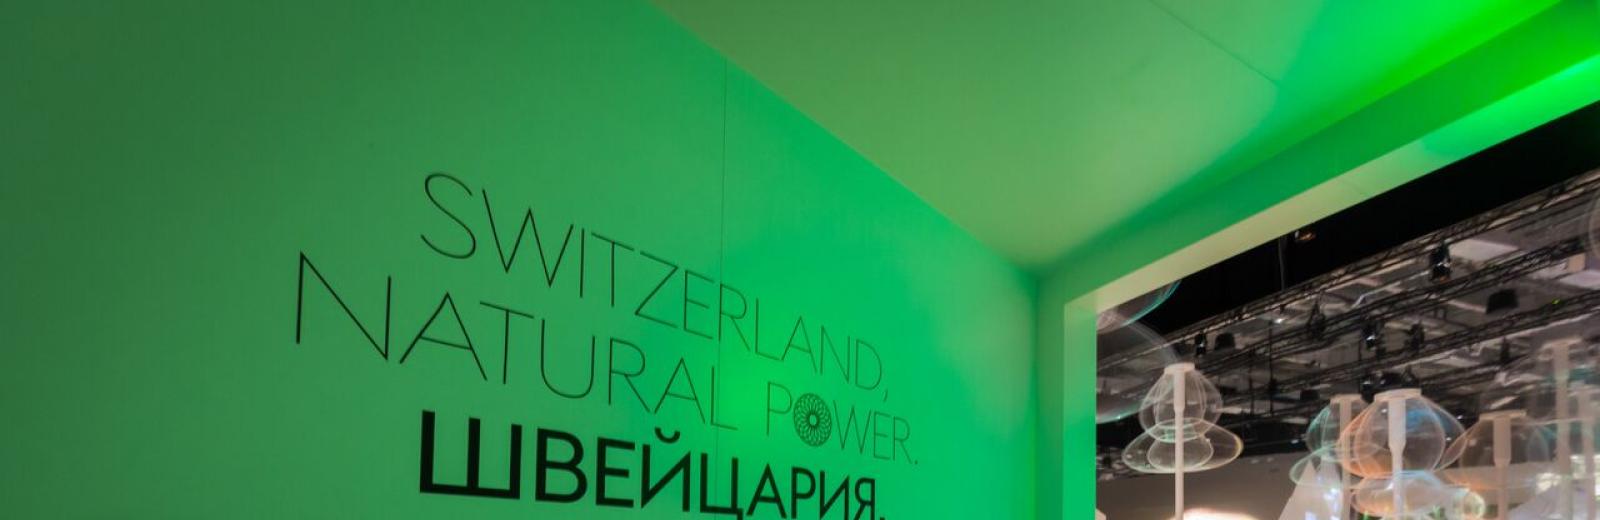 reen energy and innovation at the Swiss Pavilion in Astana